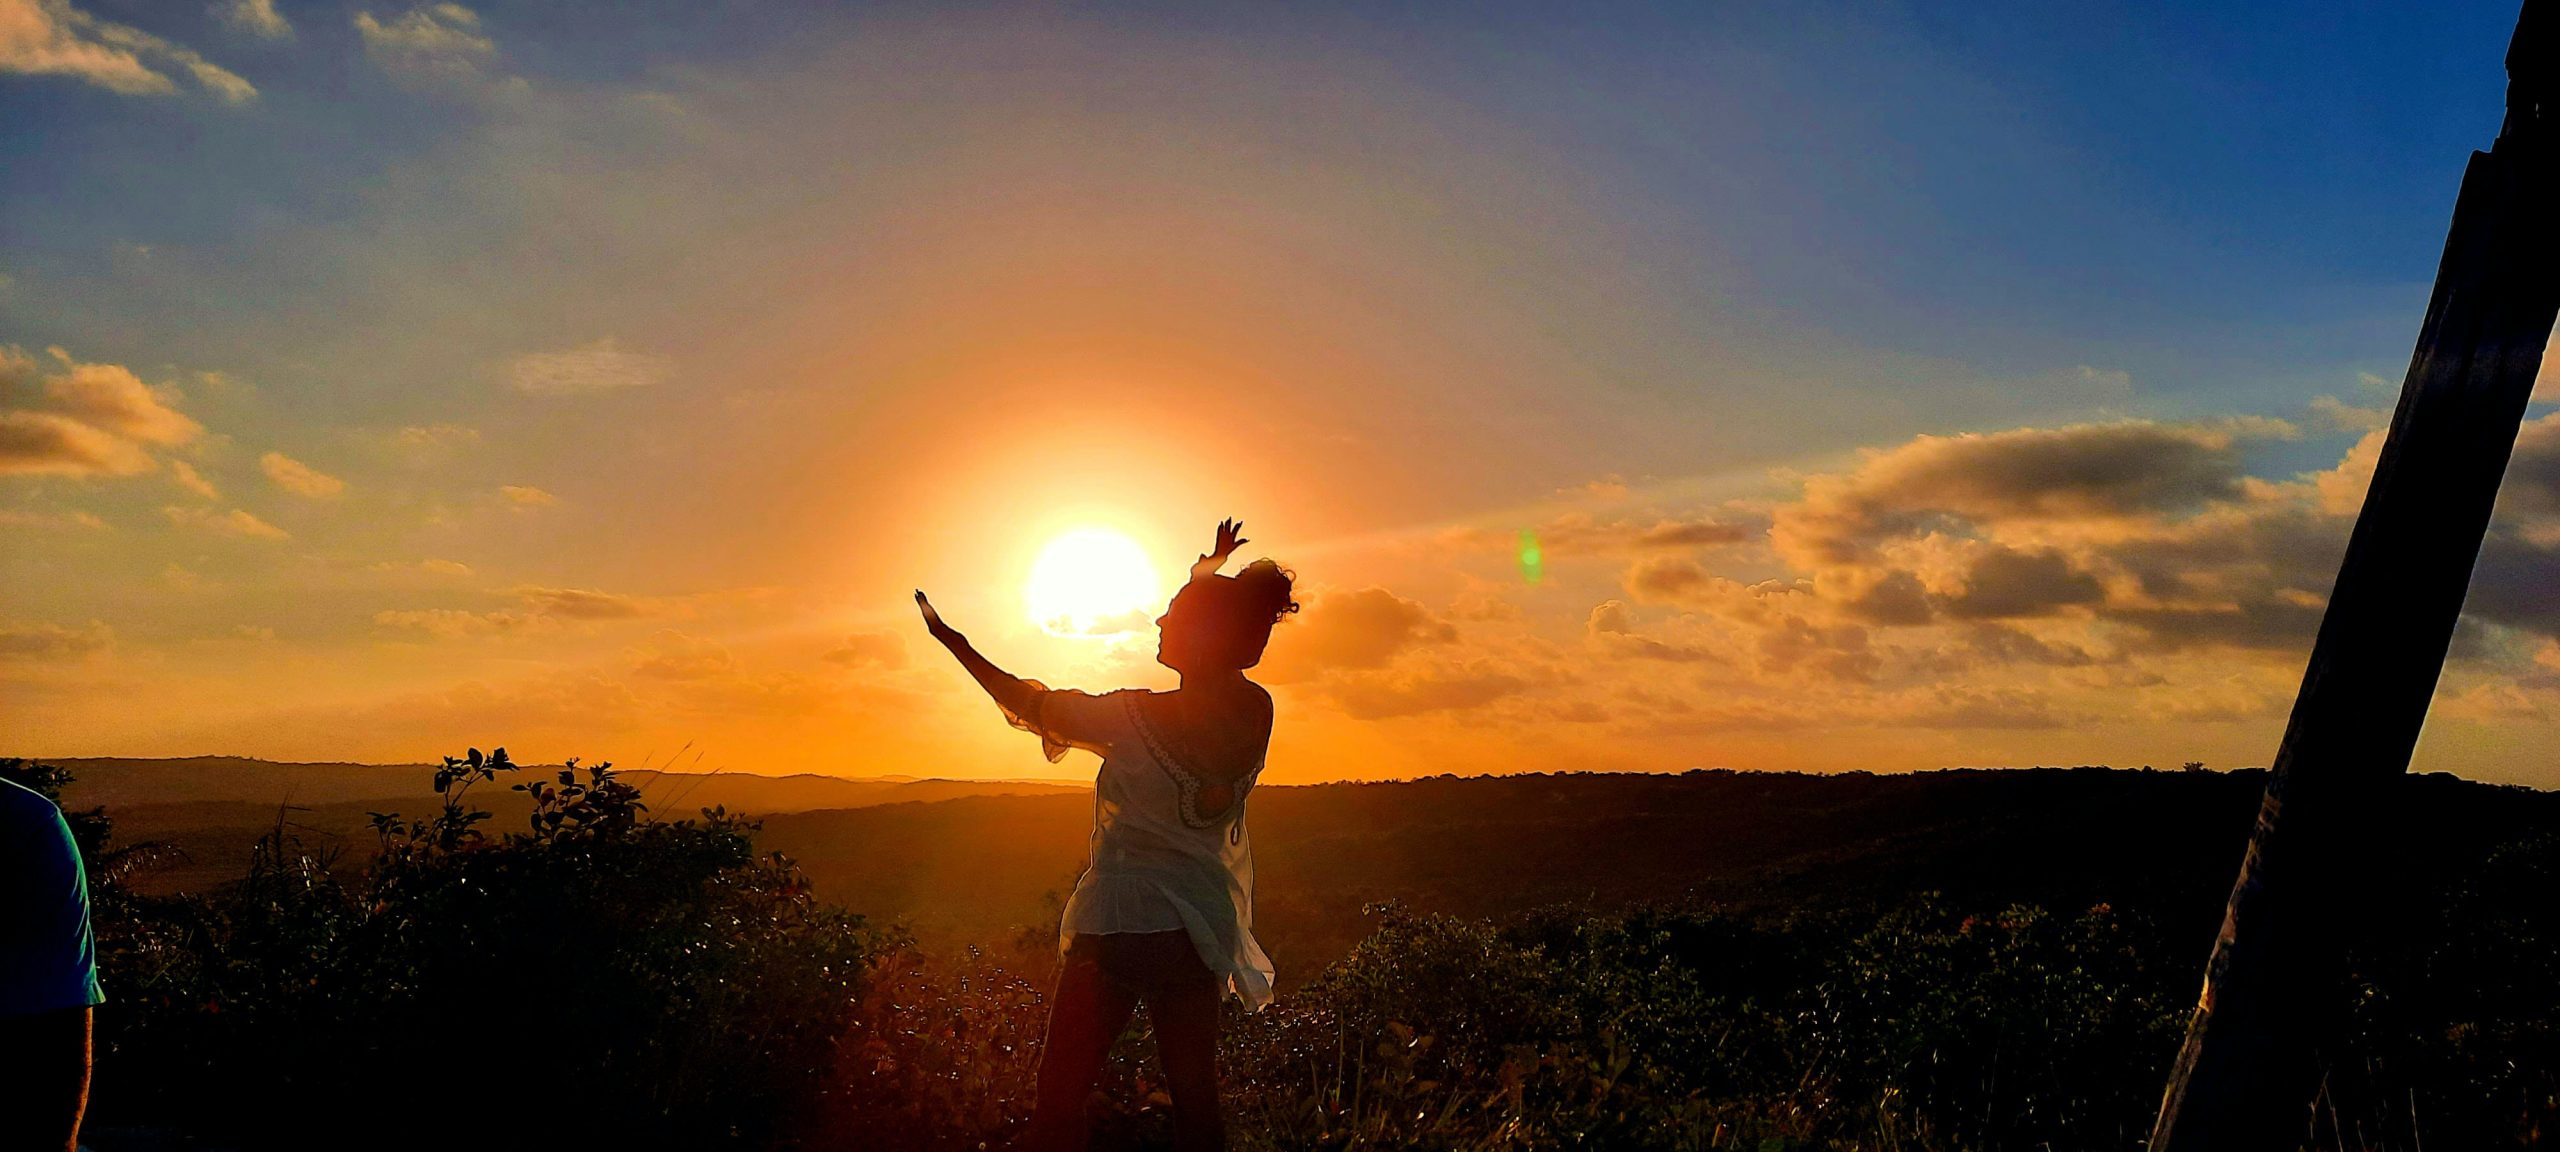 Practicing Tai Chi during the sunset